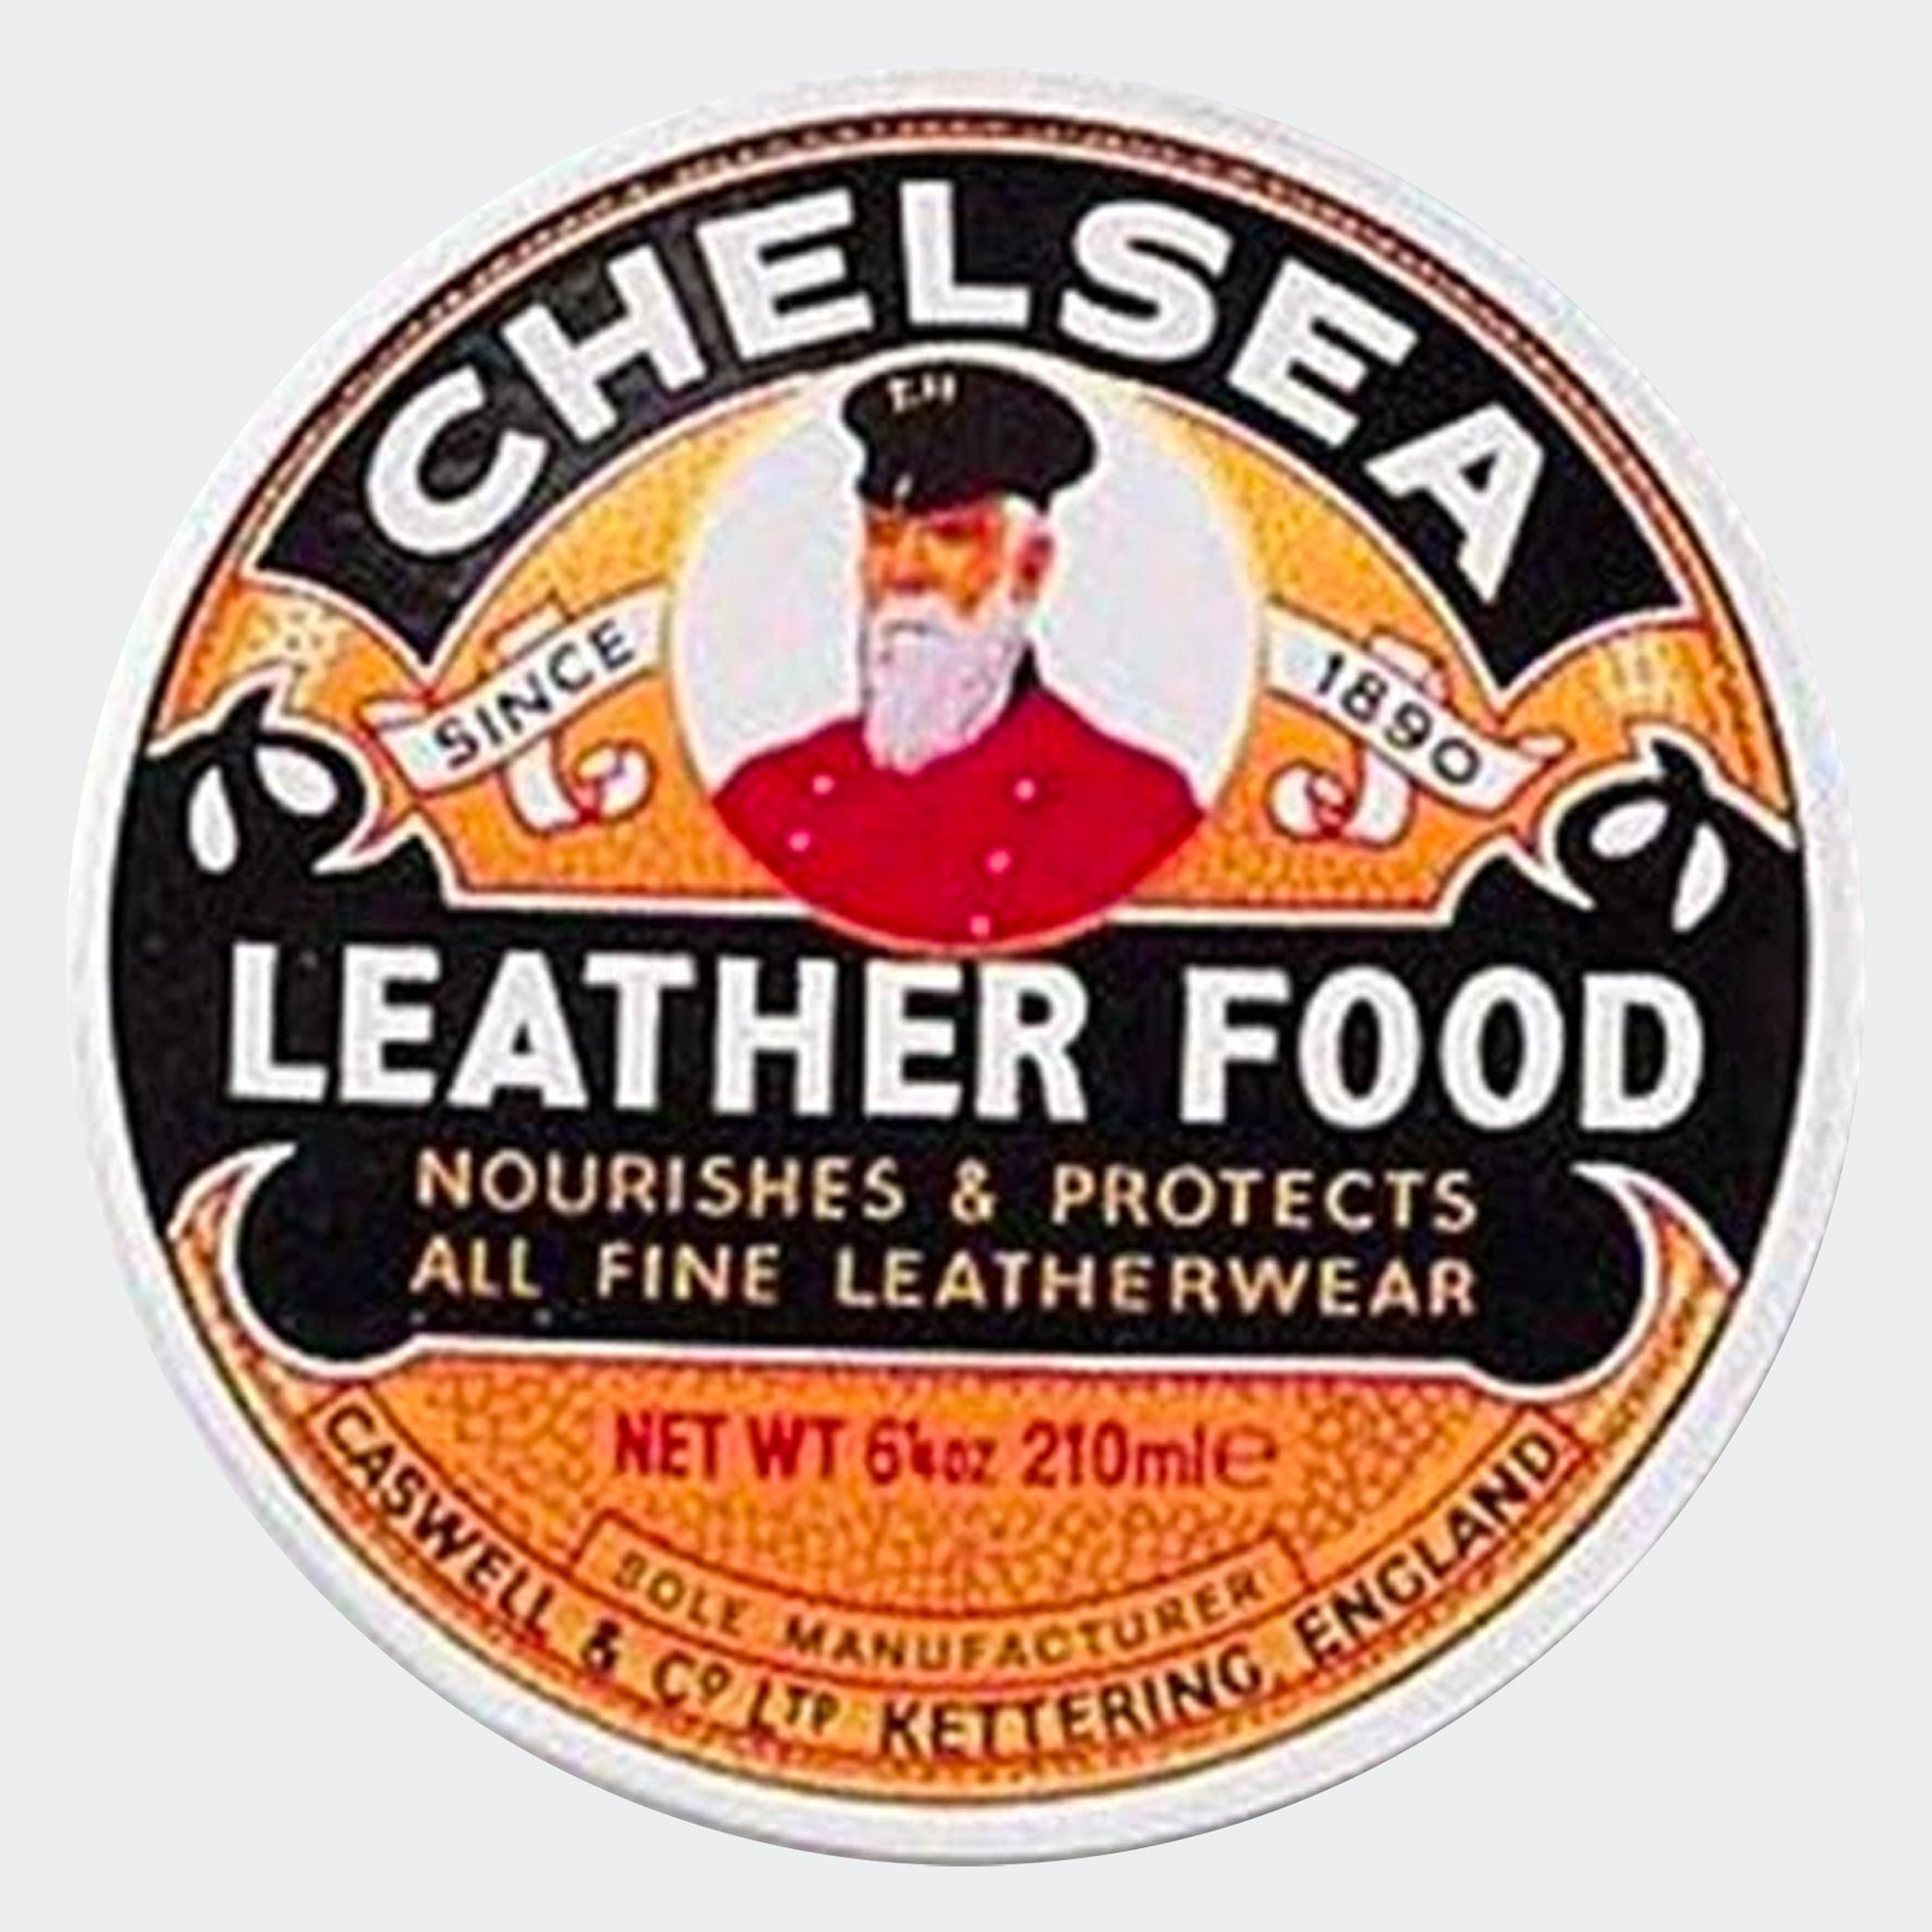 Chelsea Leather Food Clear